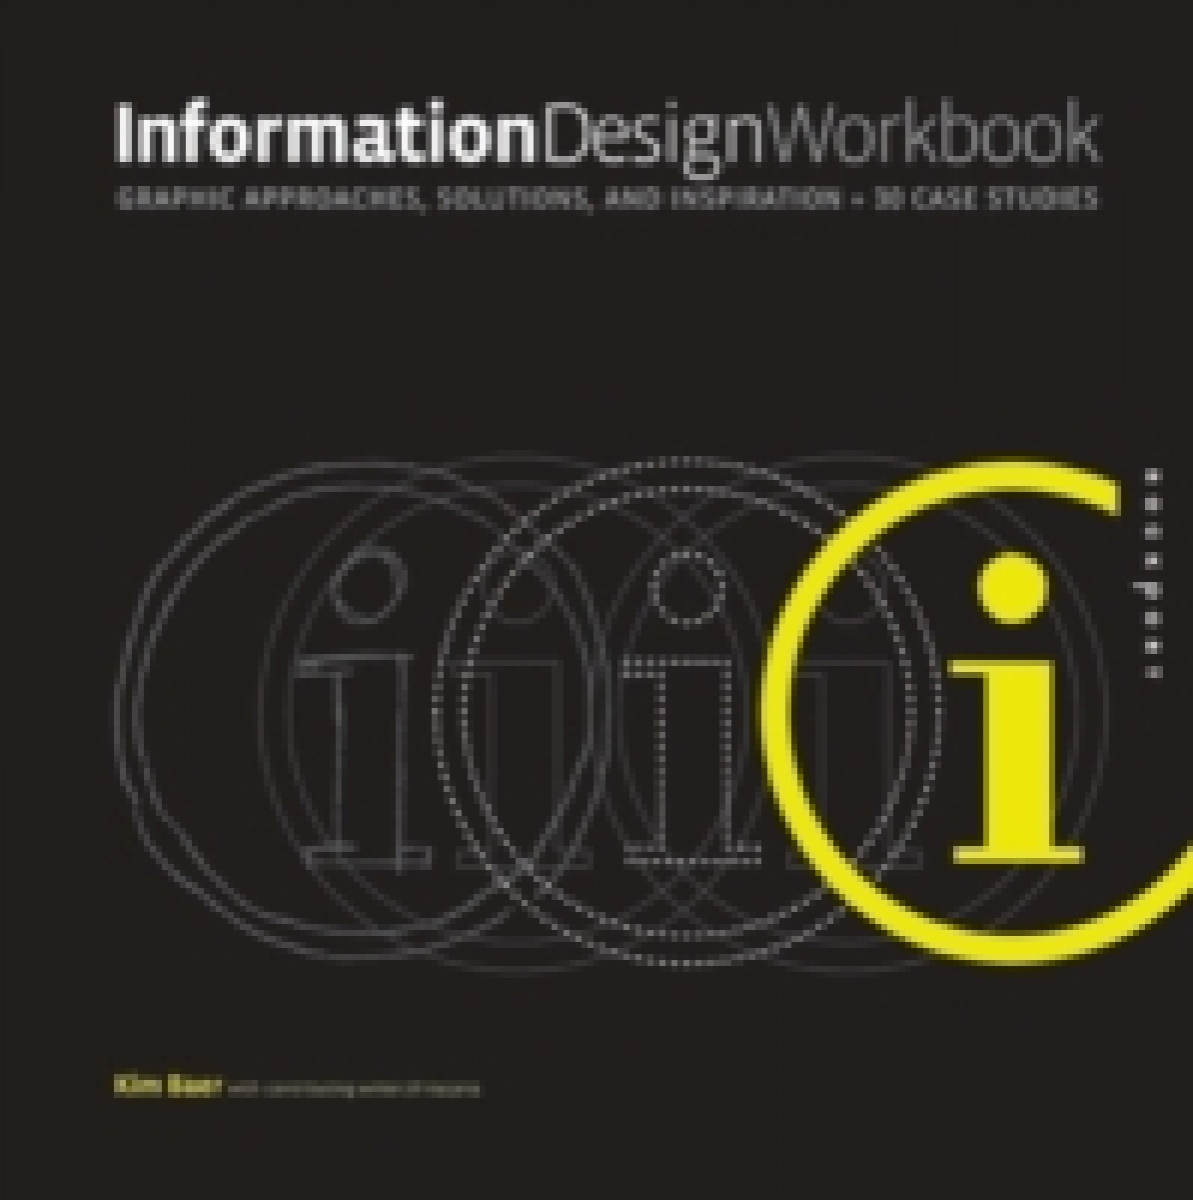 Kim B. Information Design Workbook: Graphic Approaches, Solutions, and Inspiration 